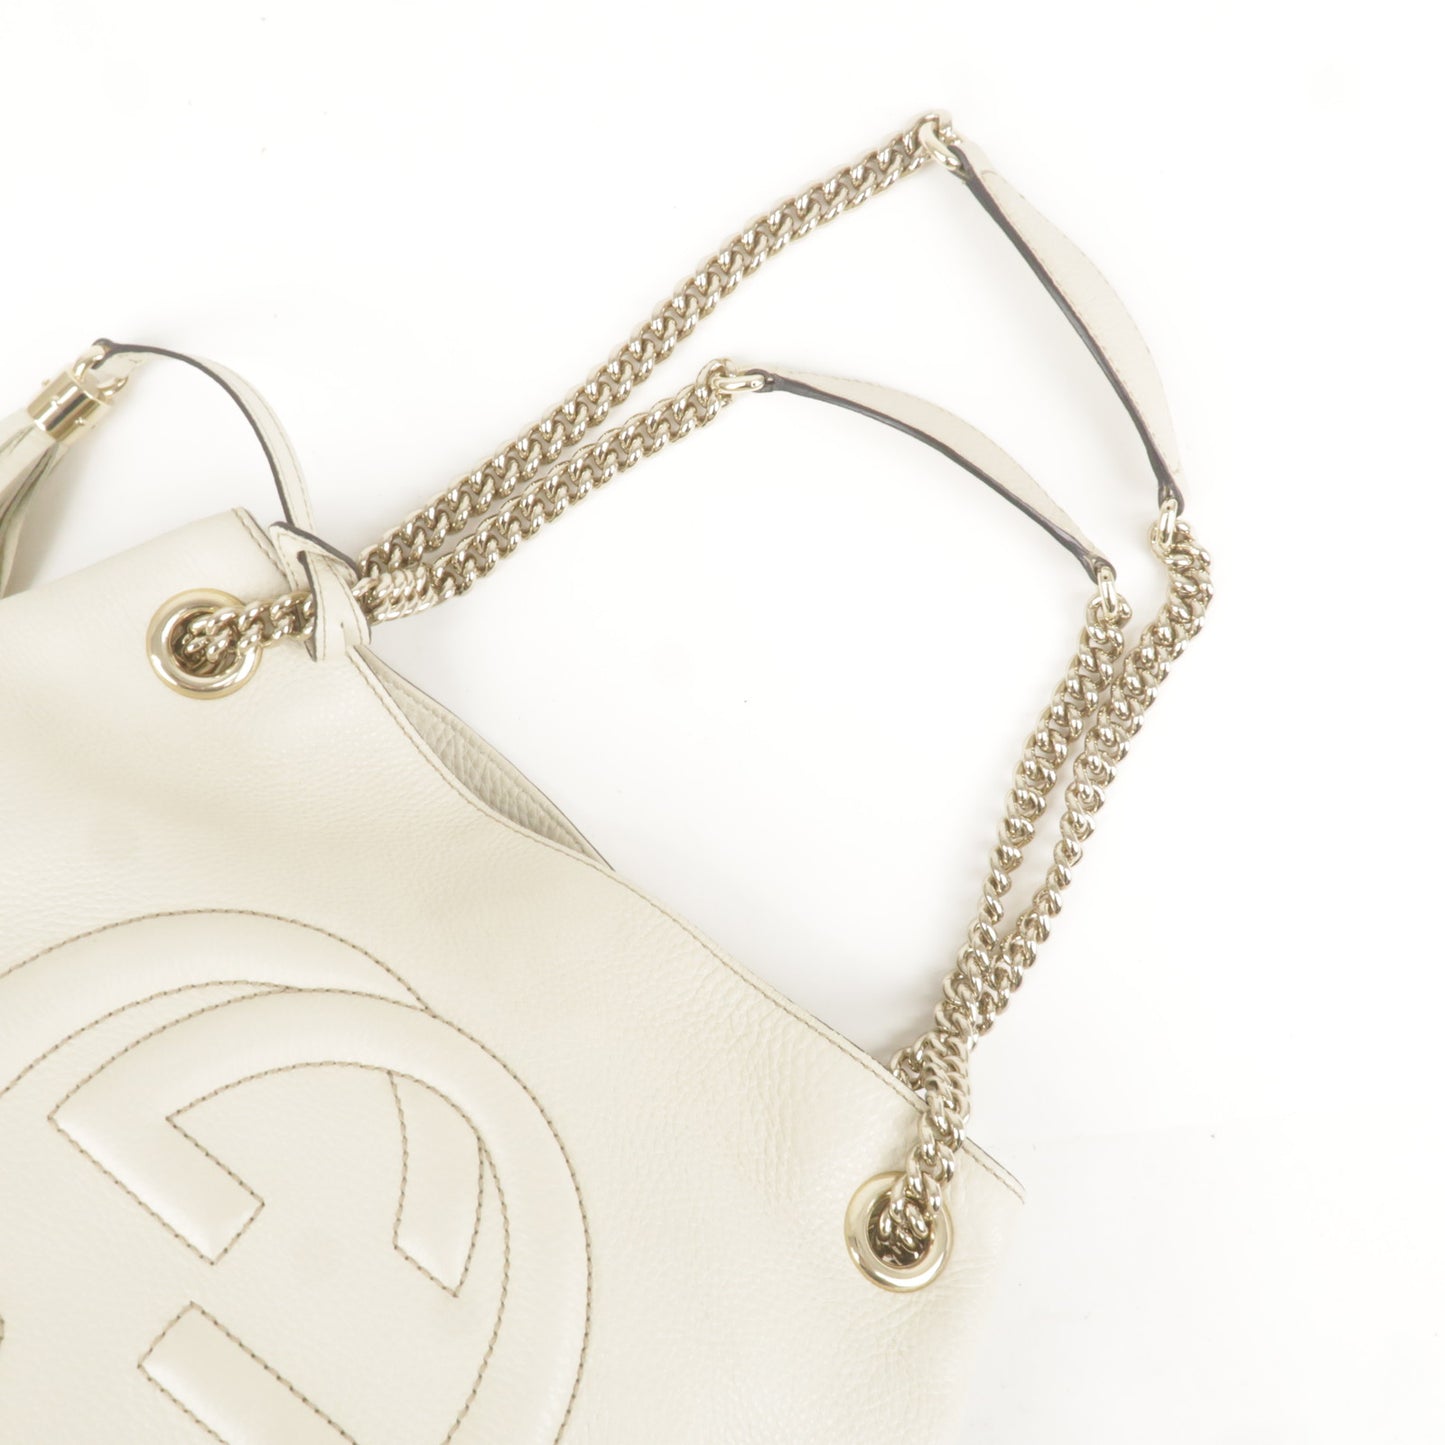 Gucci Soho GG Ivory Leather Chain Shoulder Bag – Queen Bee of